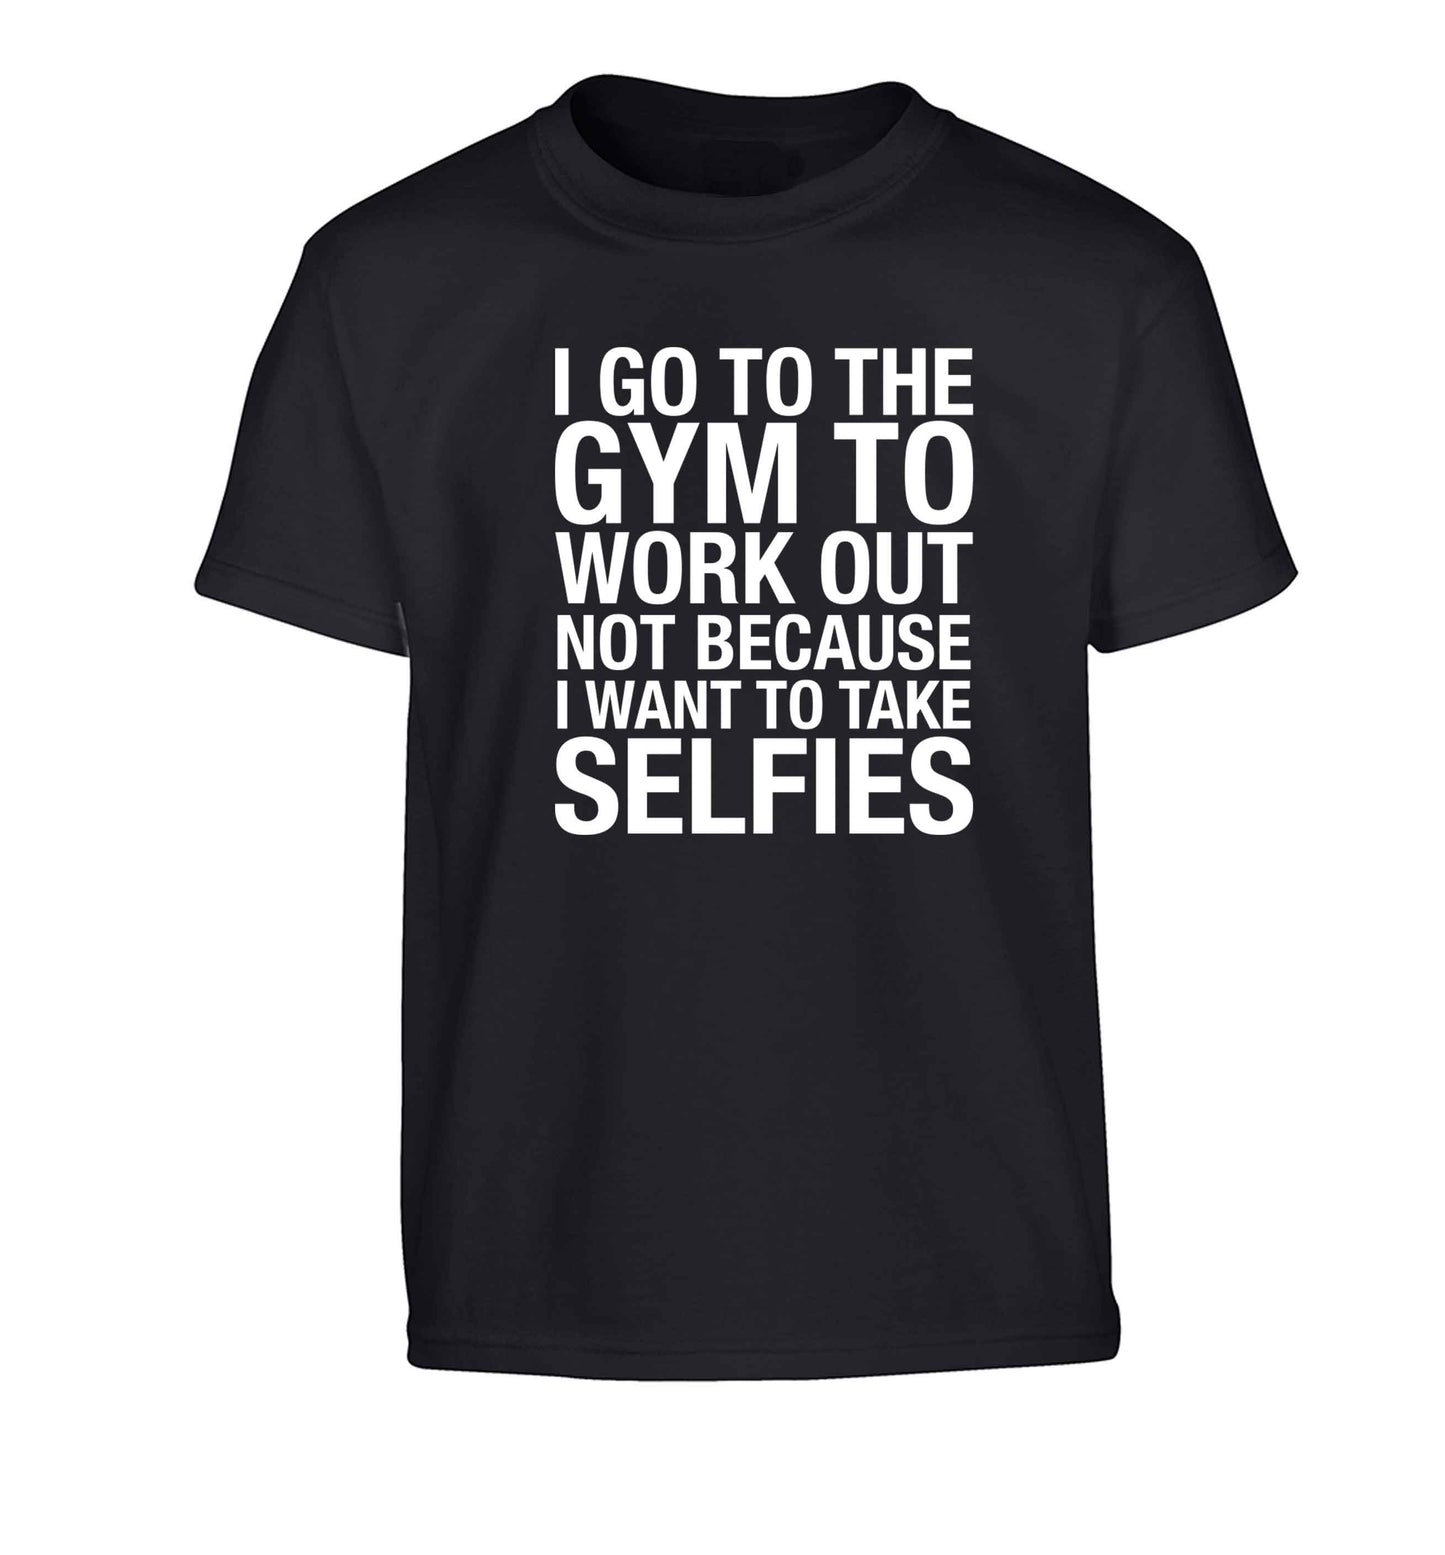 I go to the gym to workout not to take selfies Children's black Tshirt 12-13 Years